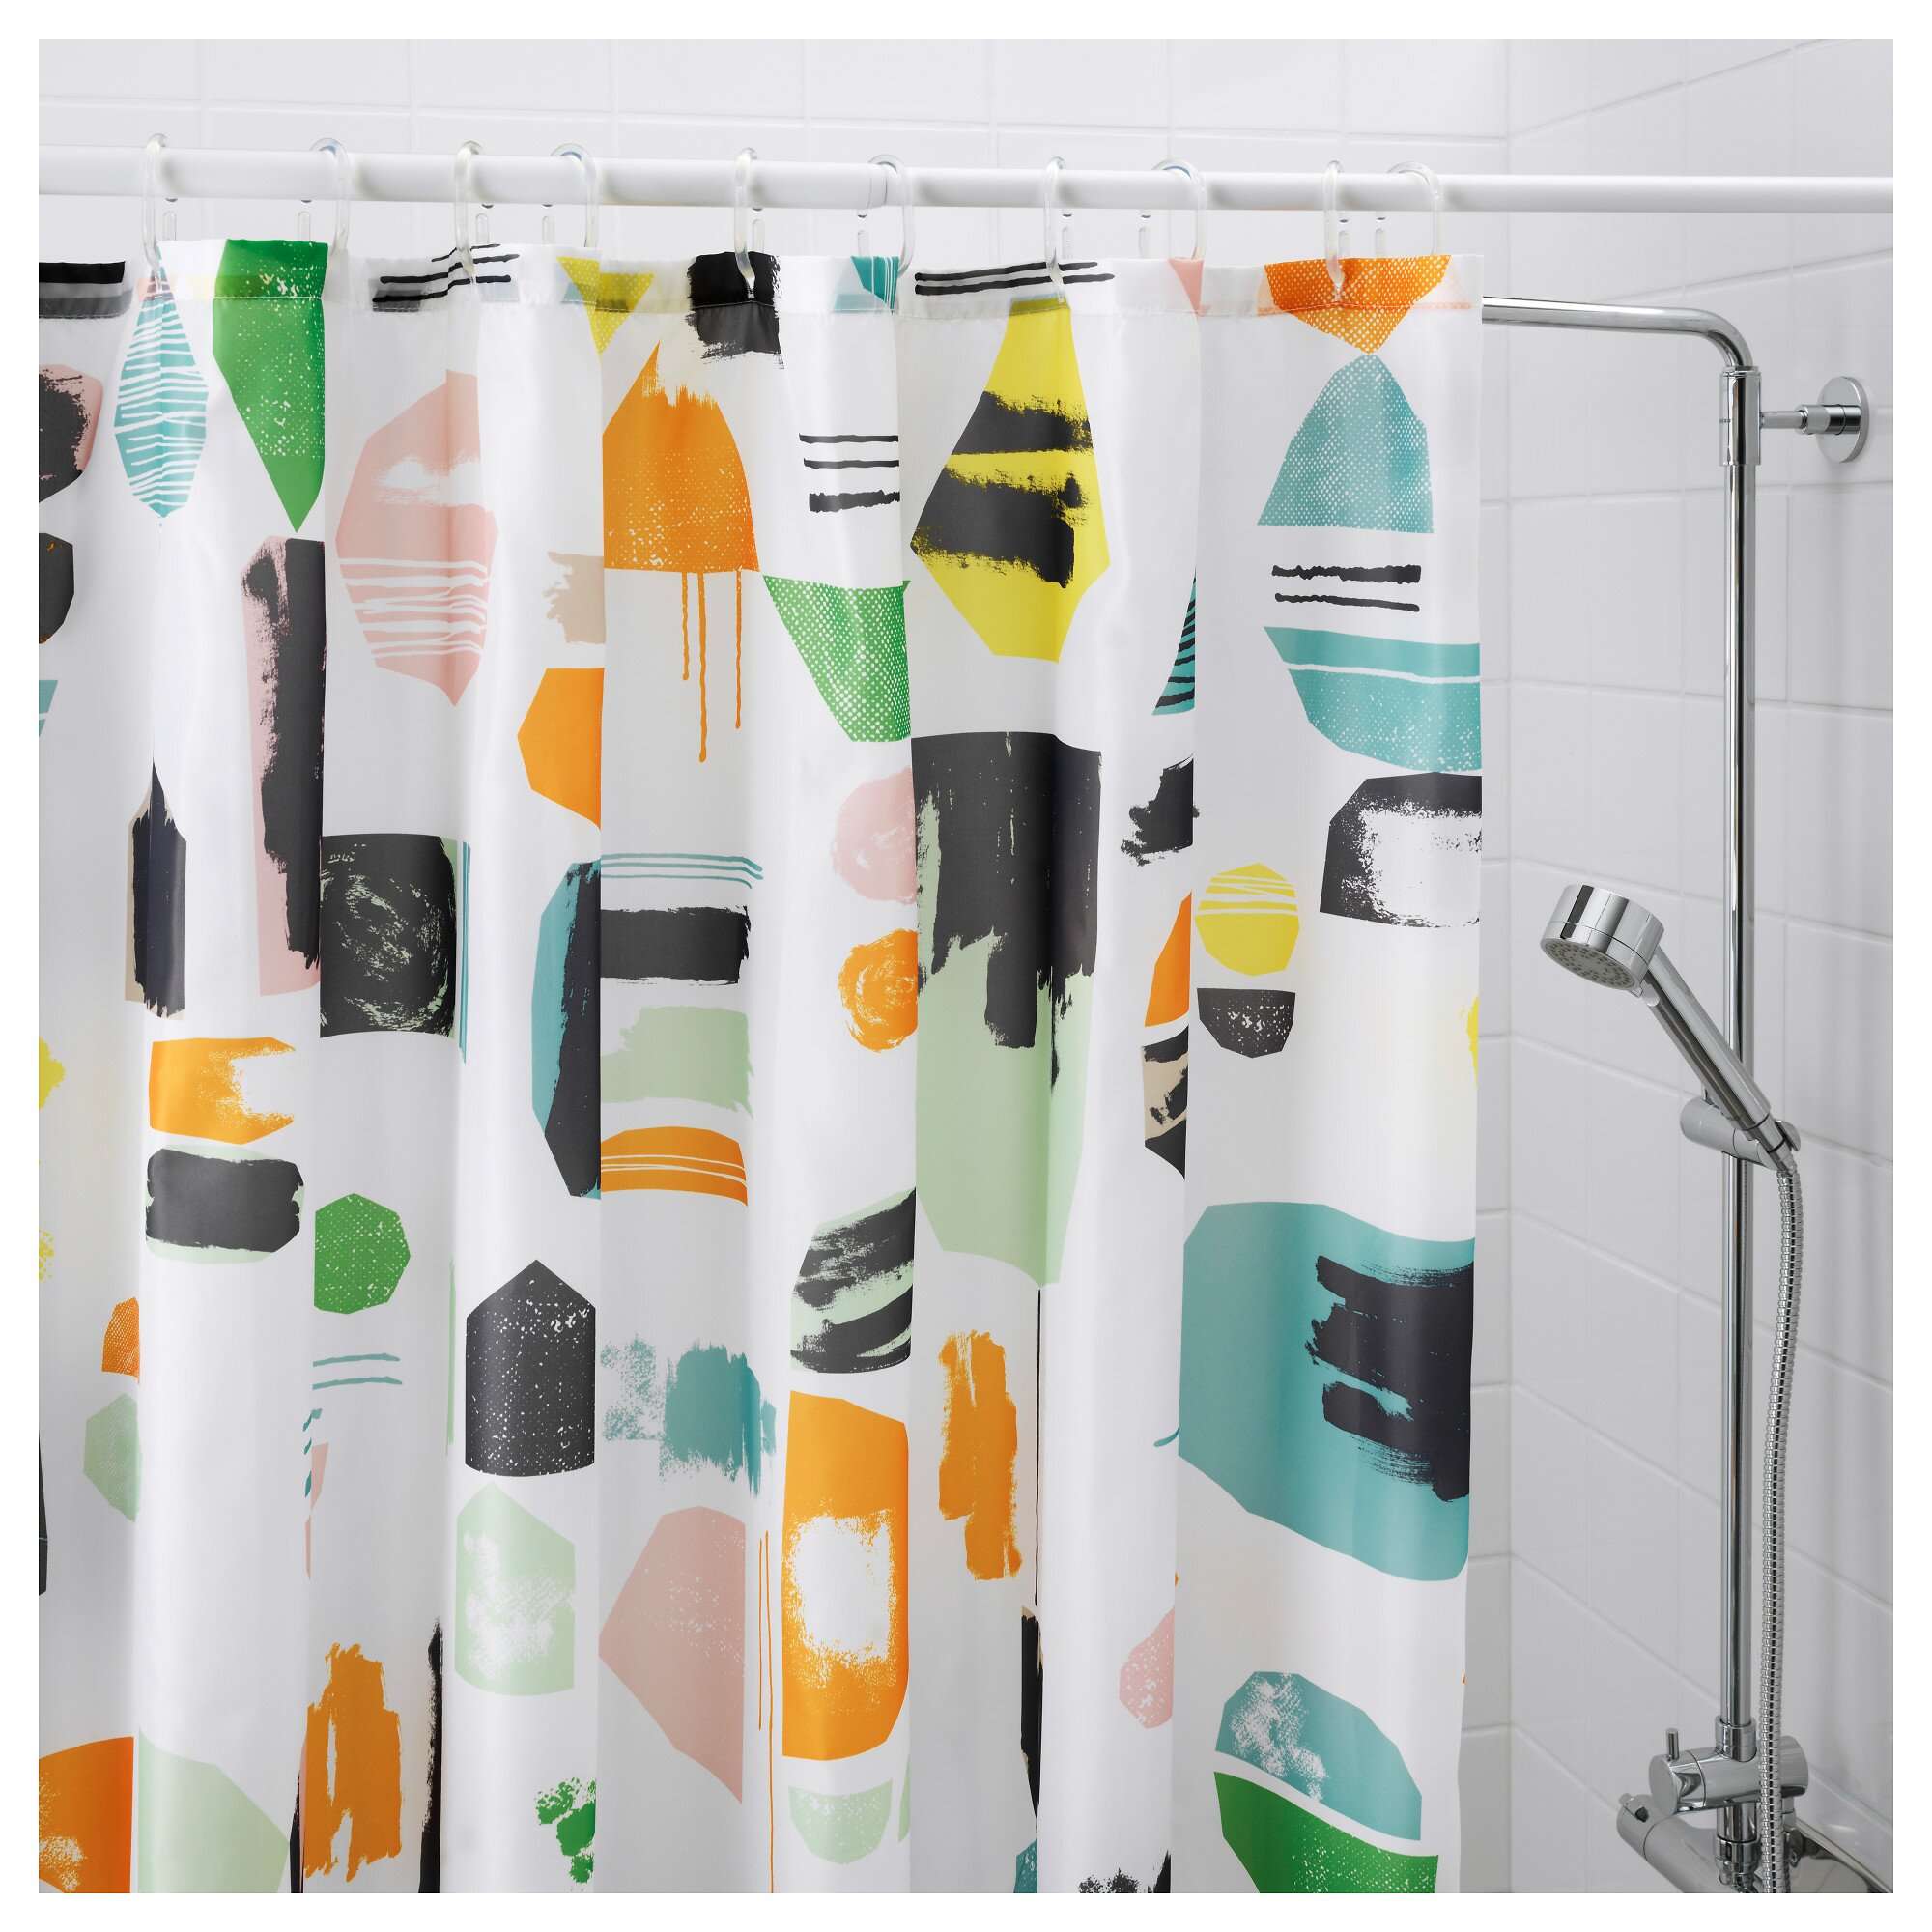 Ikea Shower Curtain for Best Your Bathroom Decoration: Cloth Shower Curtains | Ikea Shower Curtain | Extra Long Shower Curtain Target